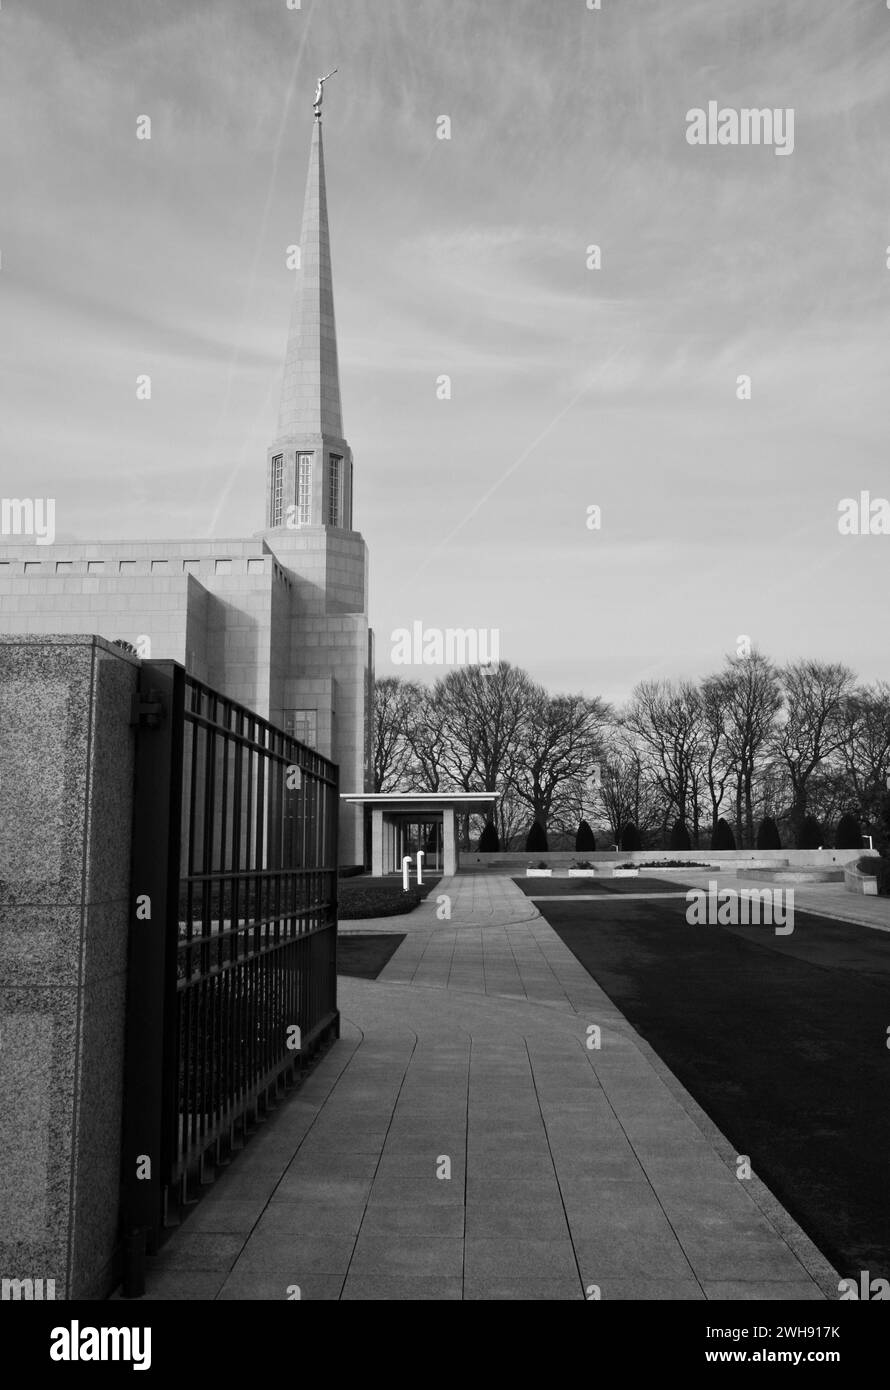 Standing at the entrance to the Preston, England Mormon Temple, on the outskirts of Chorley, Lancashire, United Kingdom Stock Photo